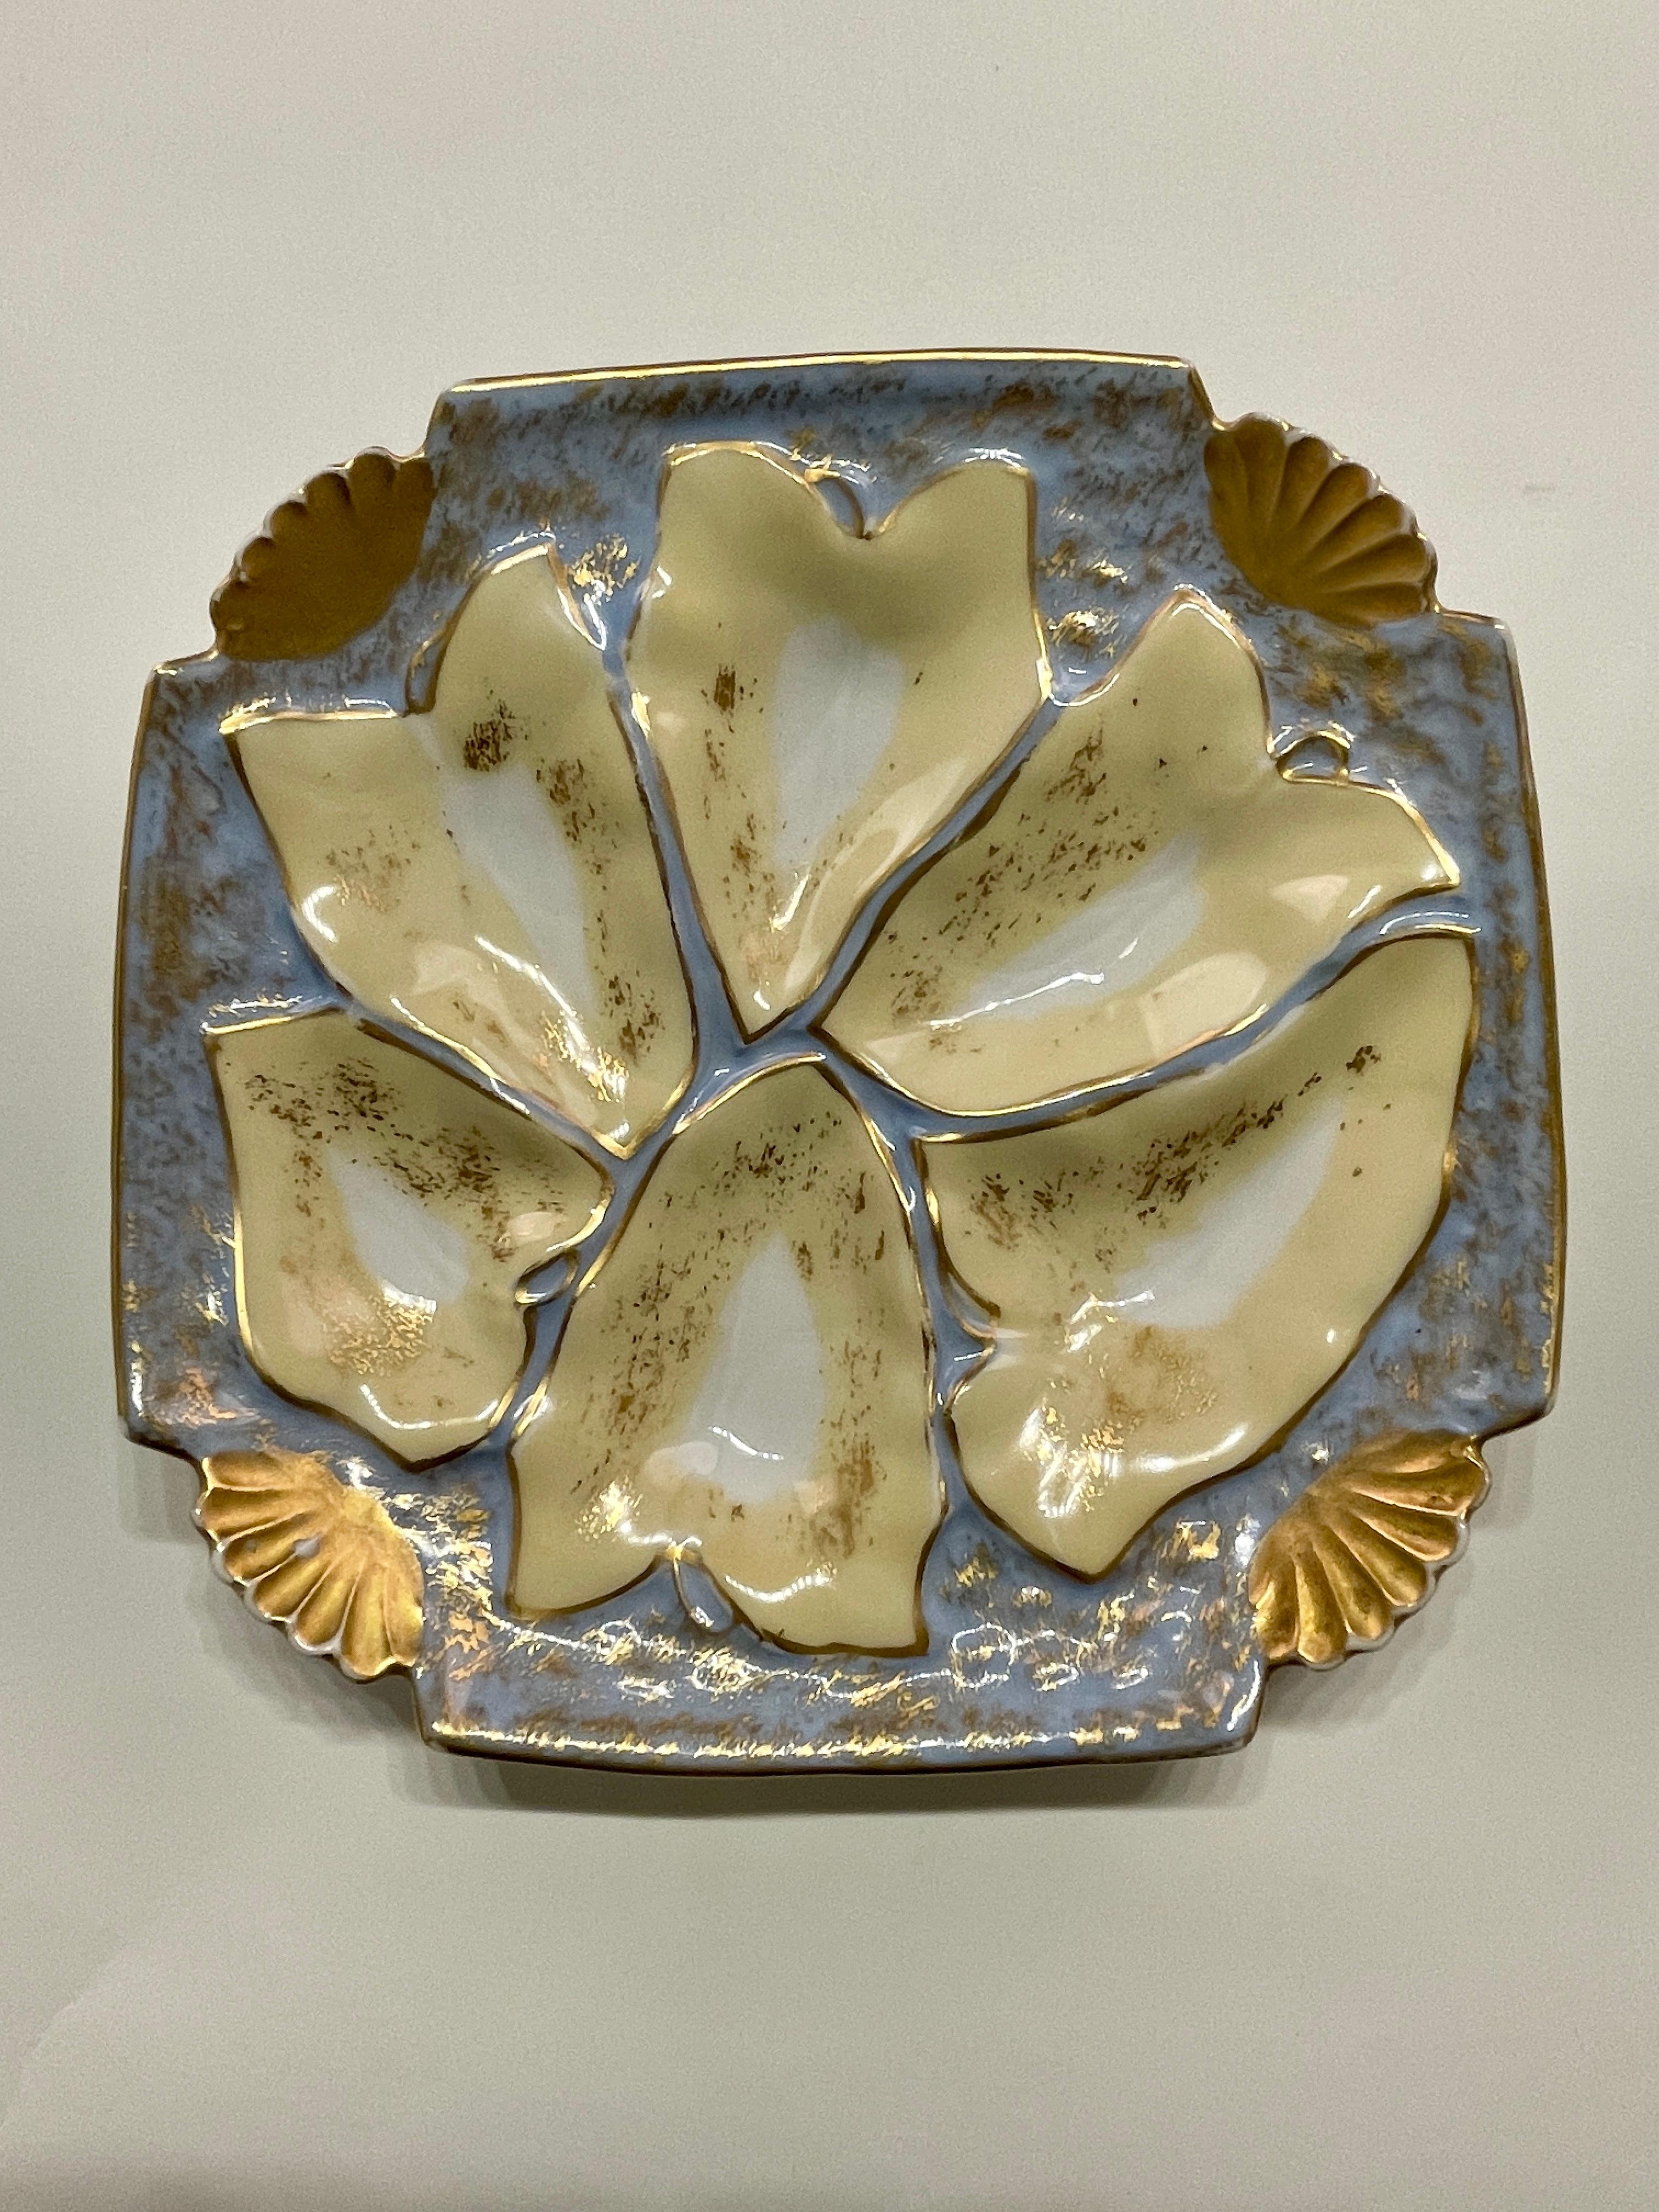 A good porcelain oyster plate from Limoges with pale blue and yellow color surrounded by gold leaf. In great condition with no chips nor hairline noted. The plate is 8.25